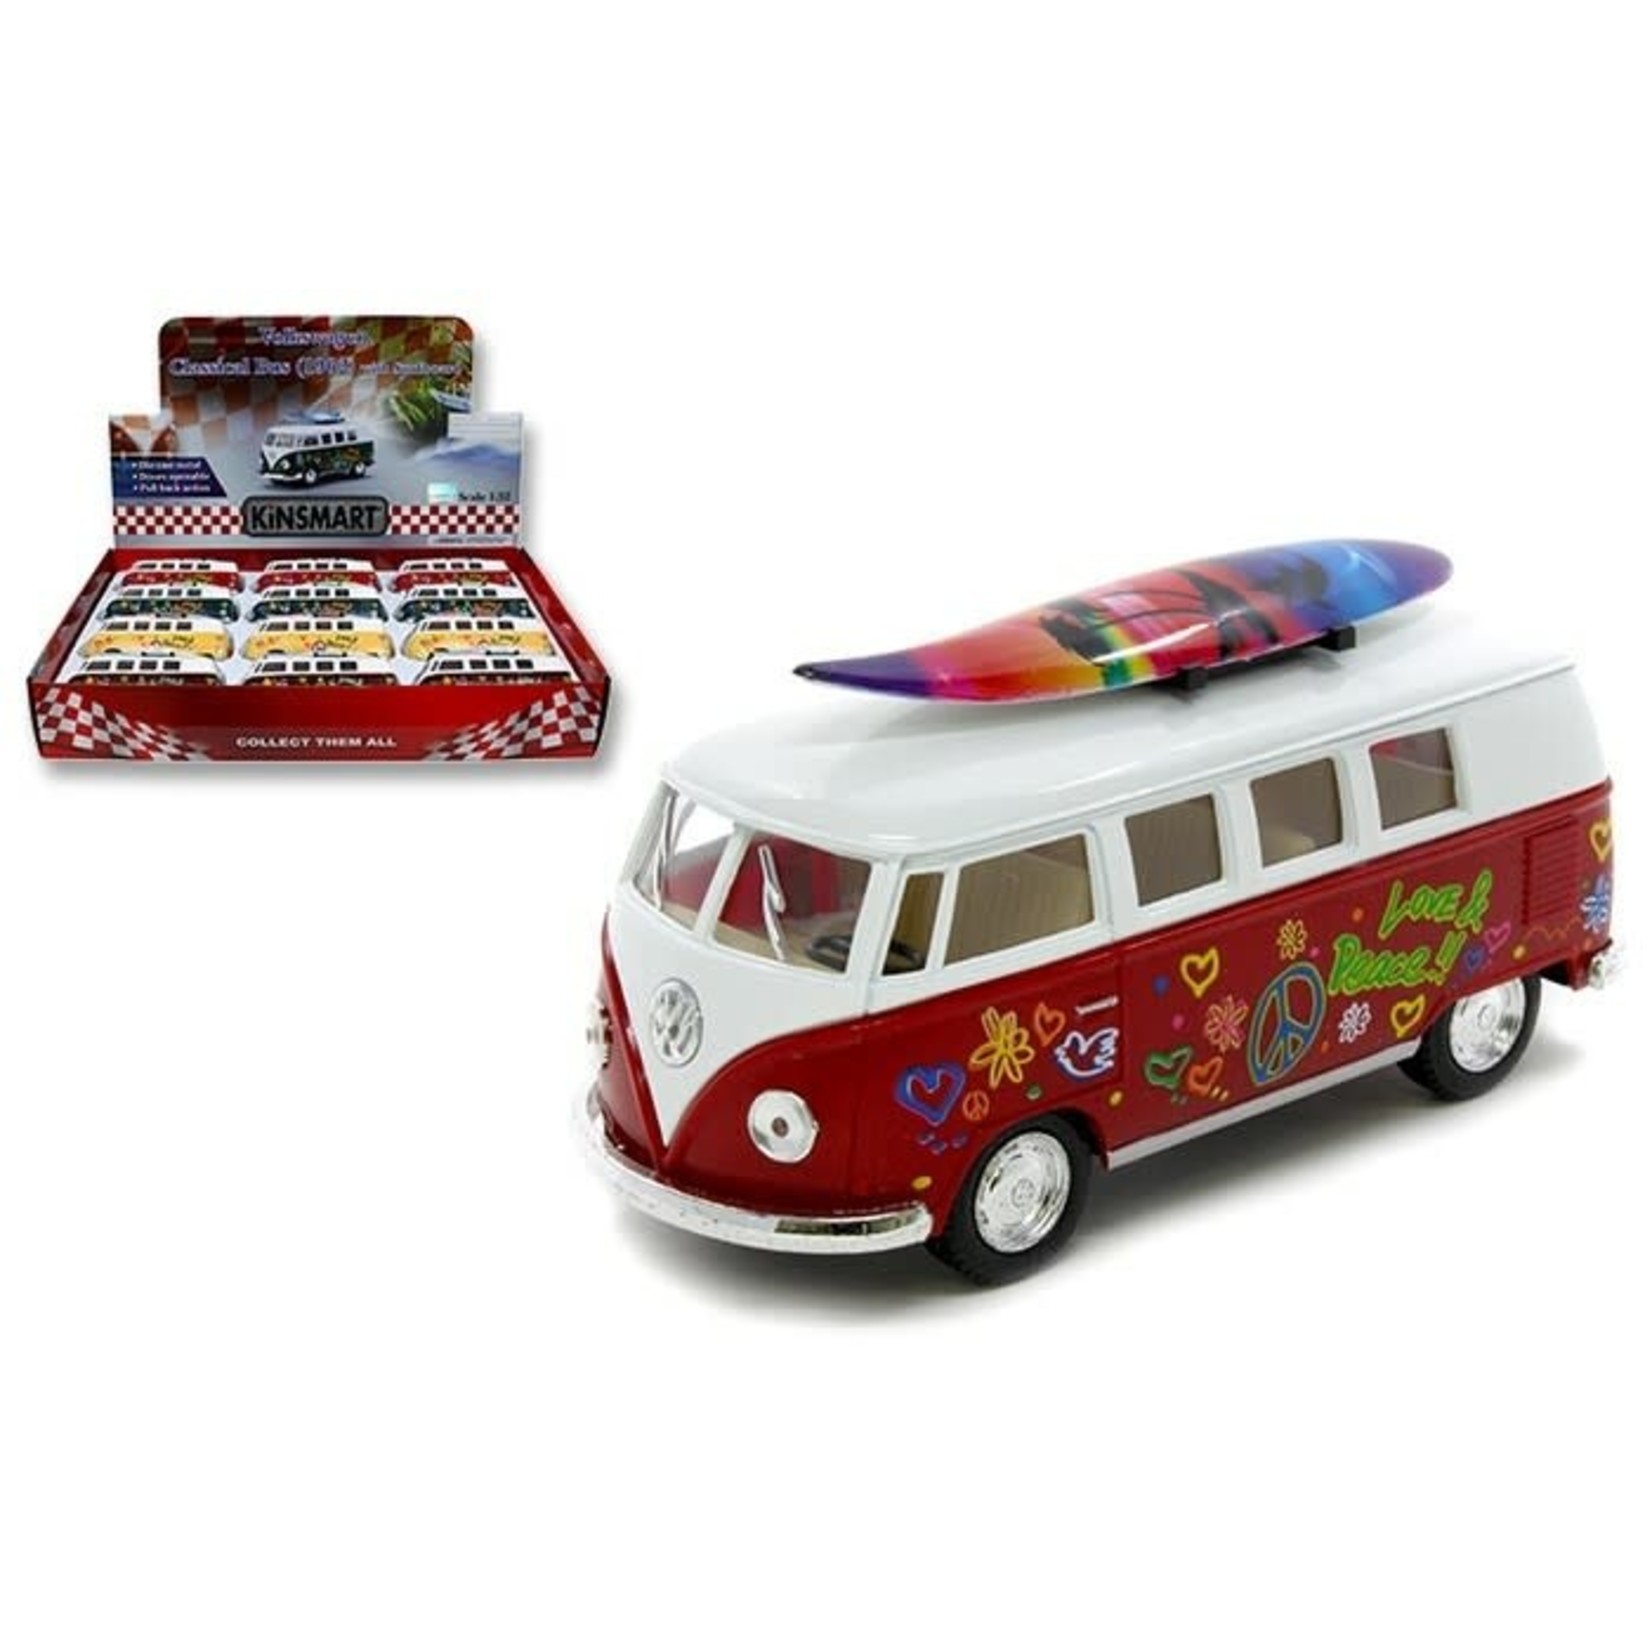 KINSMART 1:32 1962 VOLKSWAGEN CLASSICAL BUS WITH SURFBOARD AND DECALS "Yellow" 